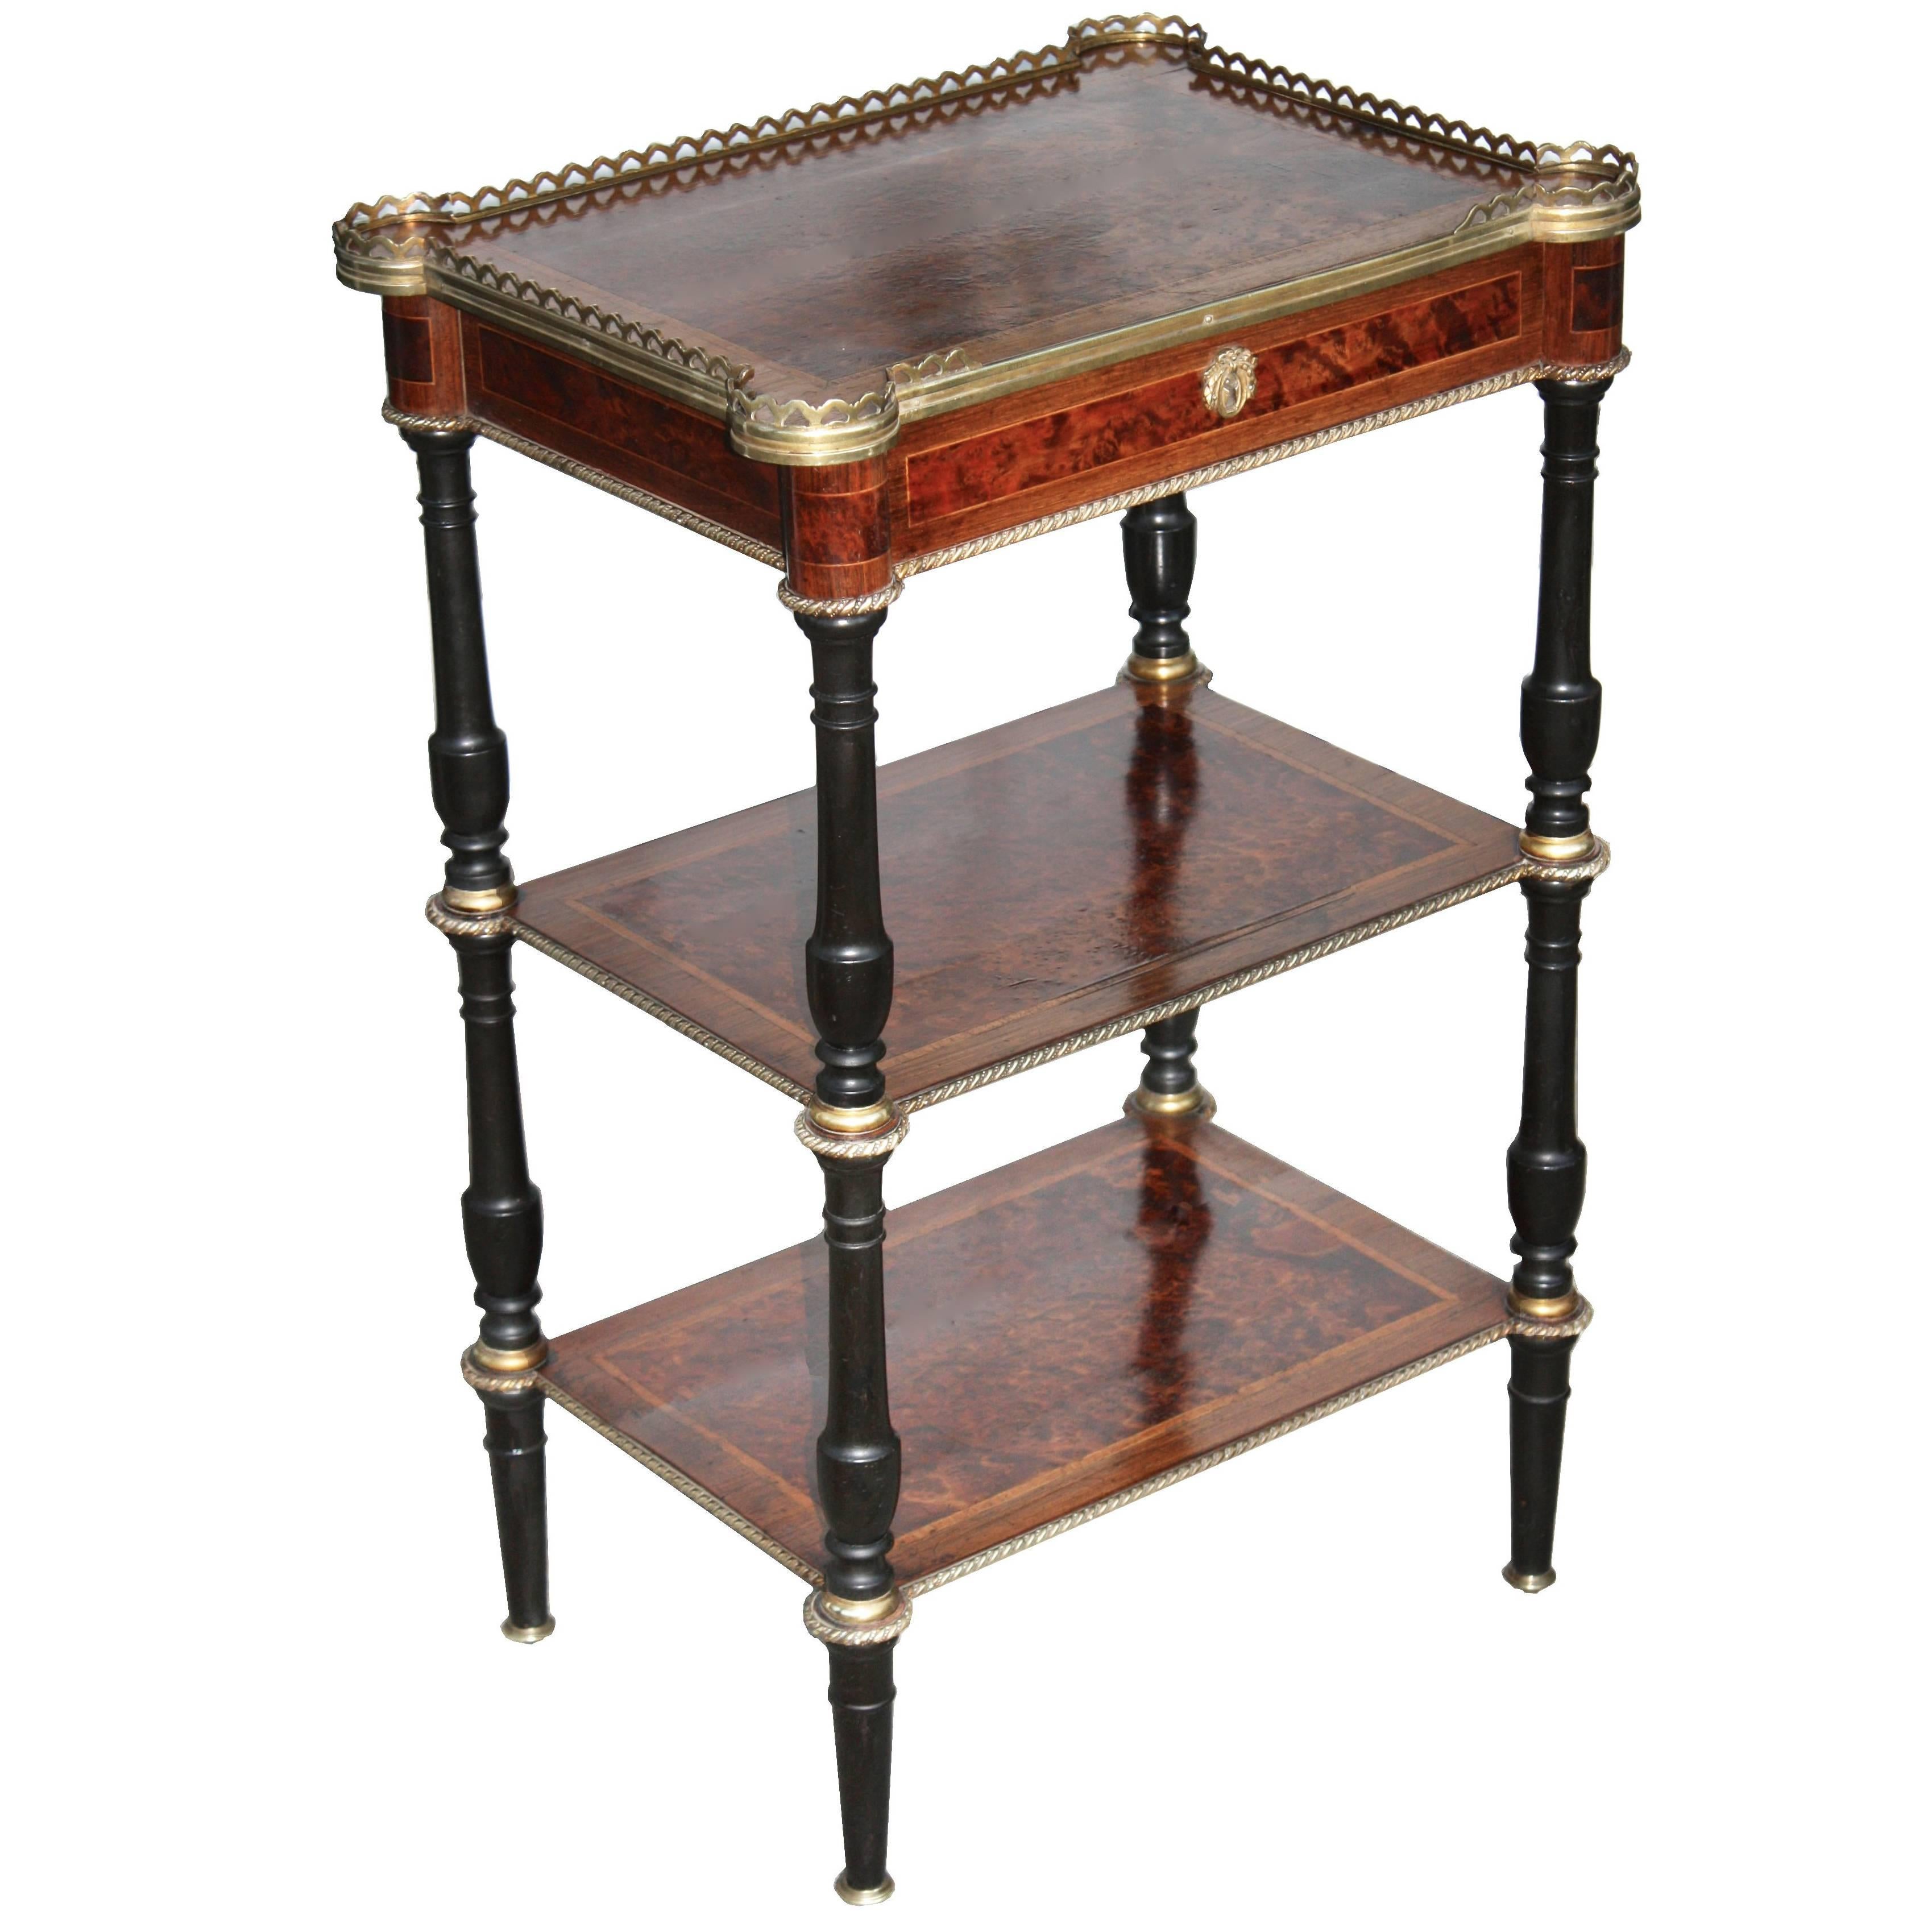 P. Sormani French Neoclassical Revival Three-Tier Side Table For Sale